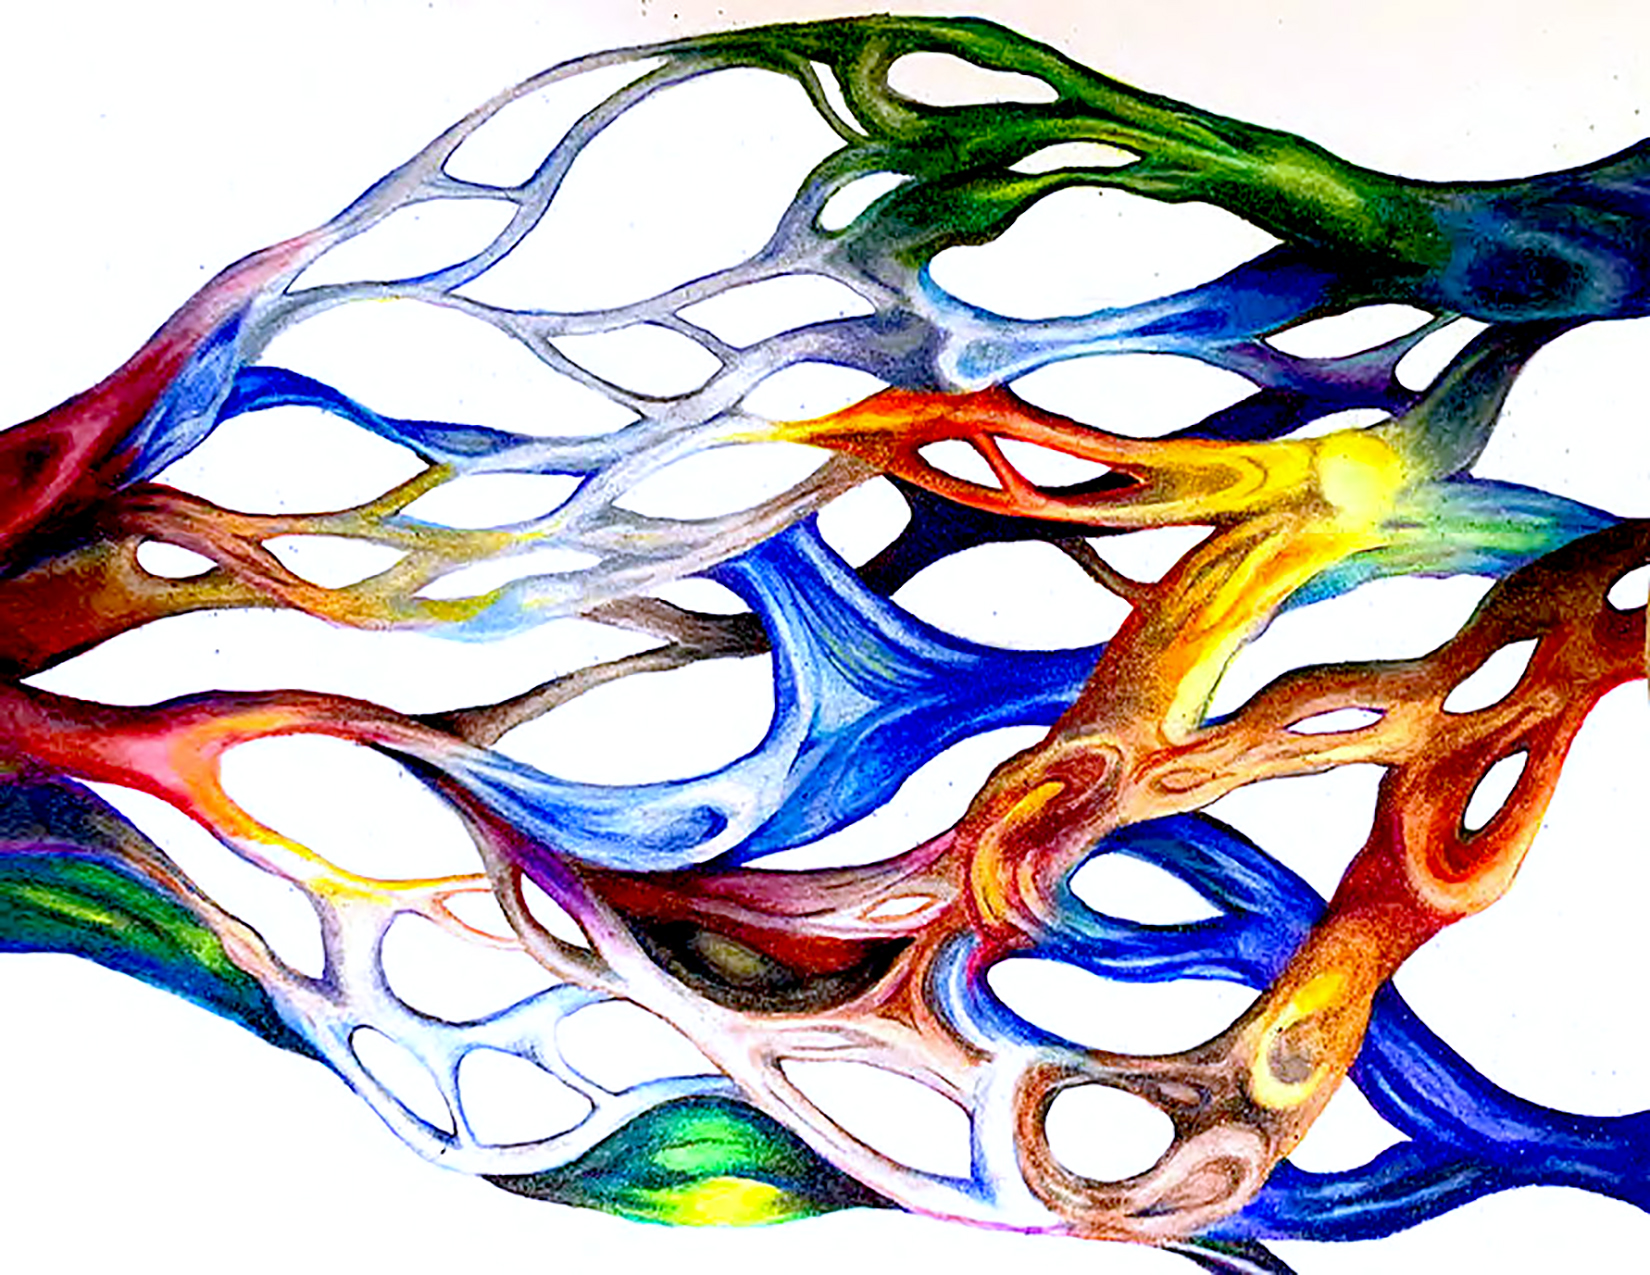 A painting of a rainbow colored network of veins and vessels